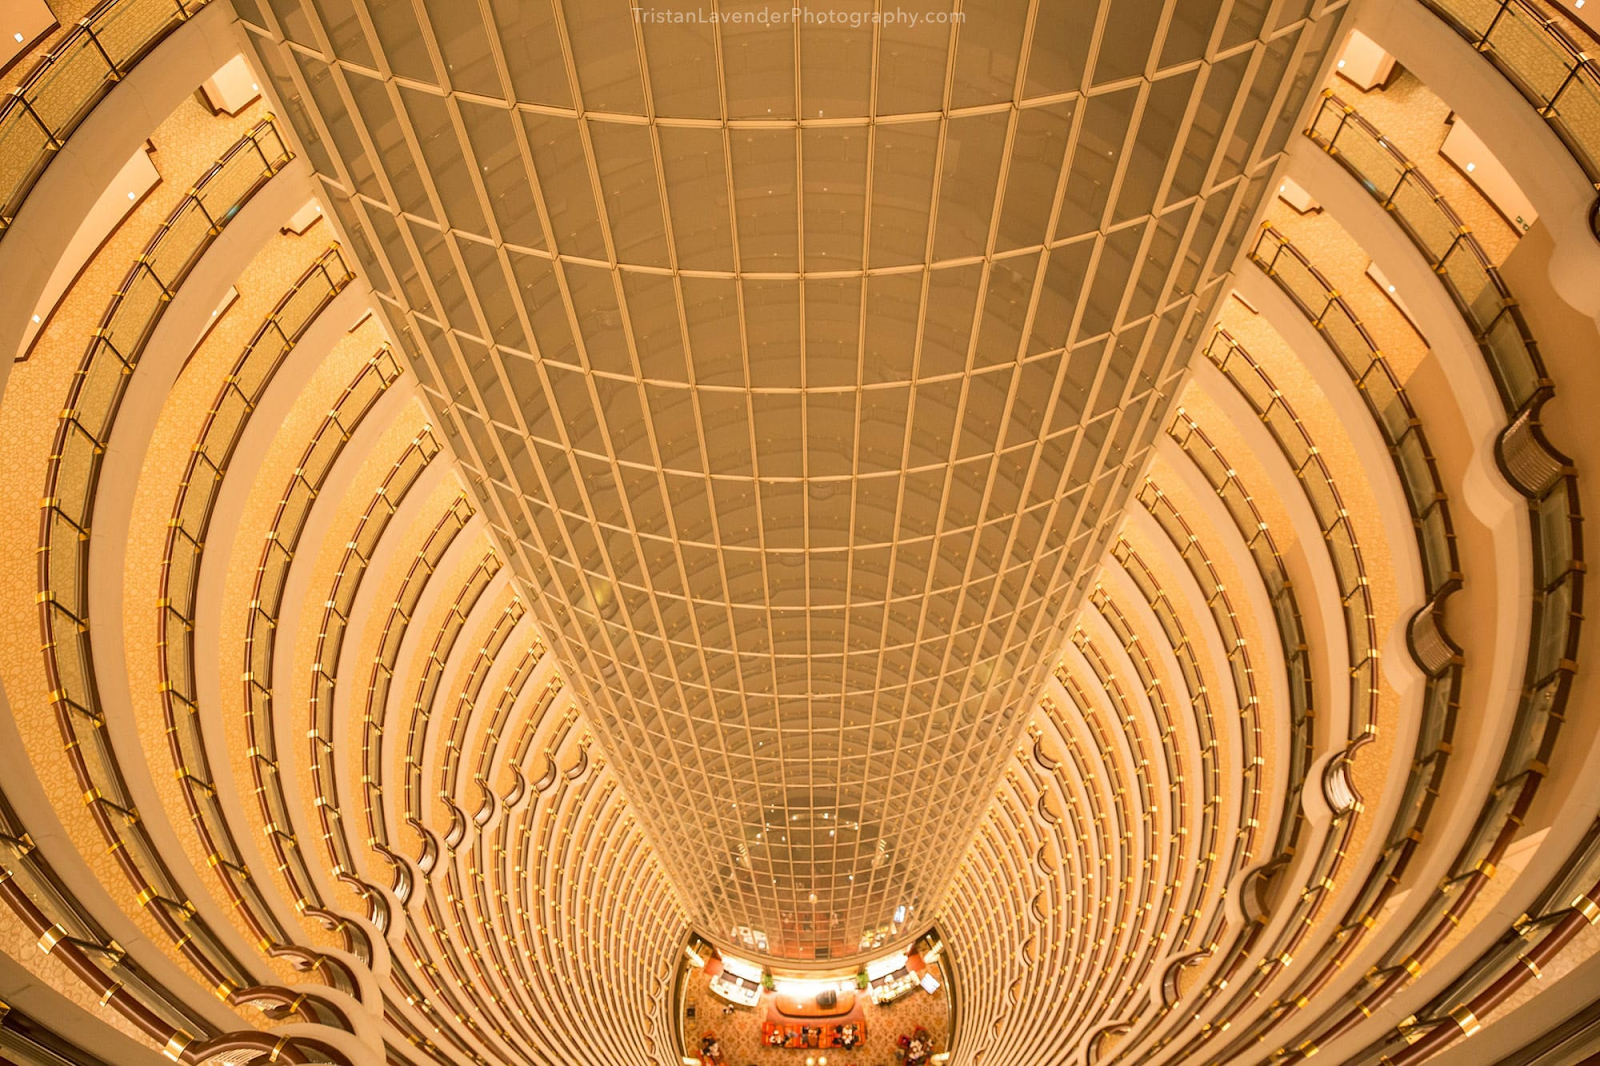 Shanghai architecture Jin Mao Tower